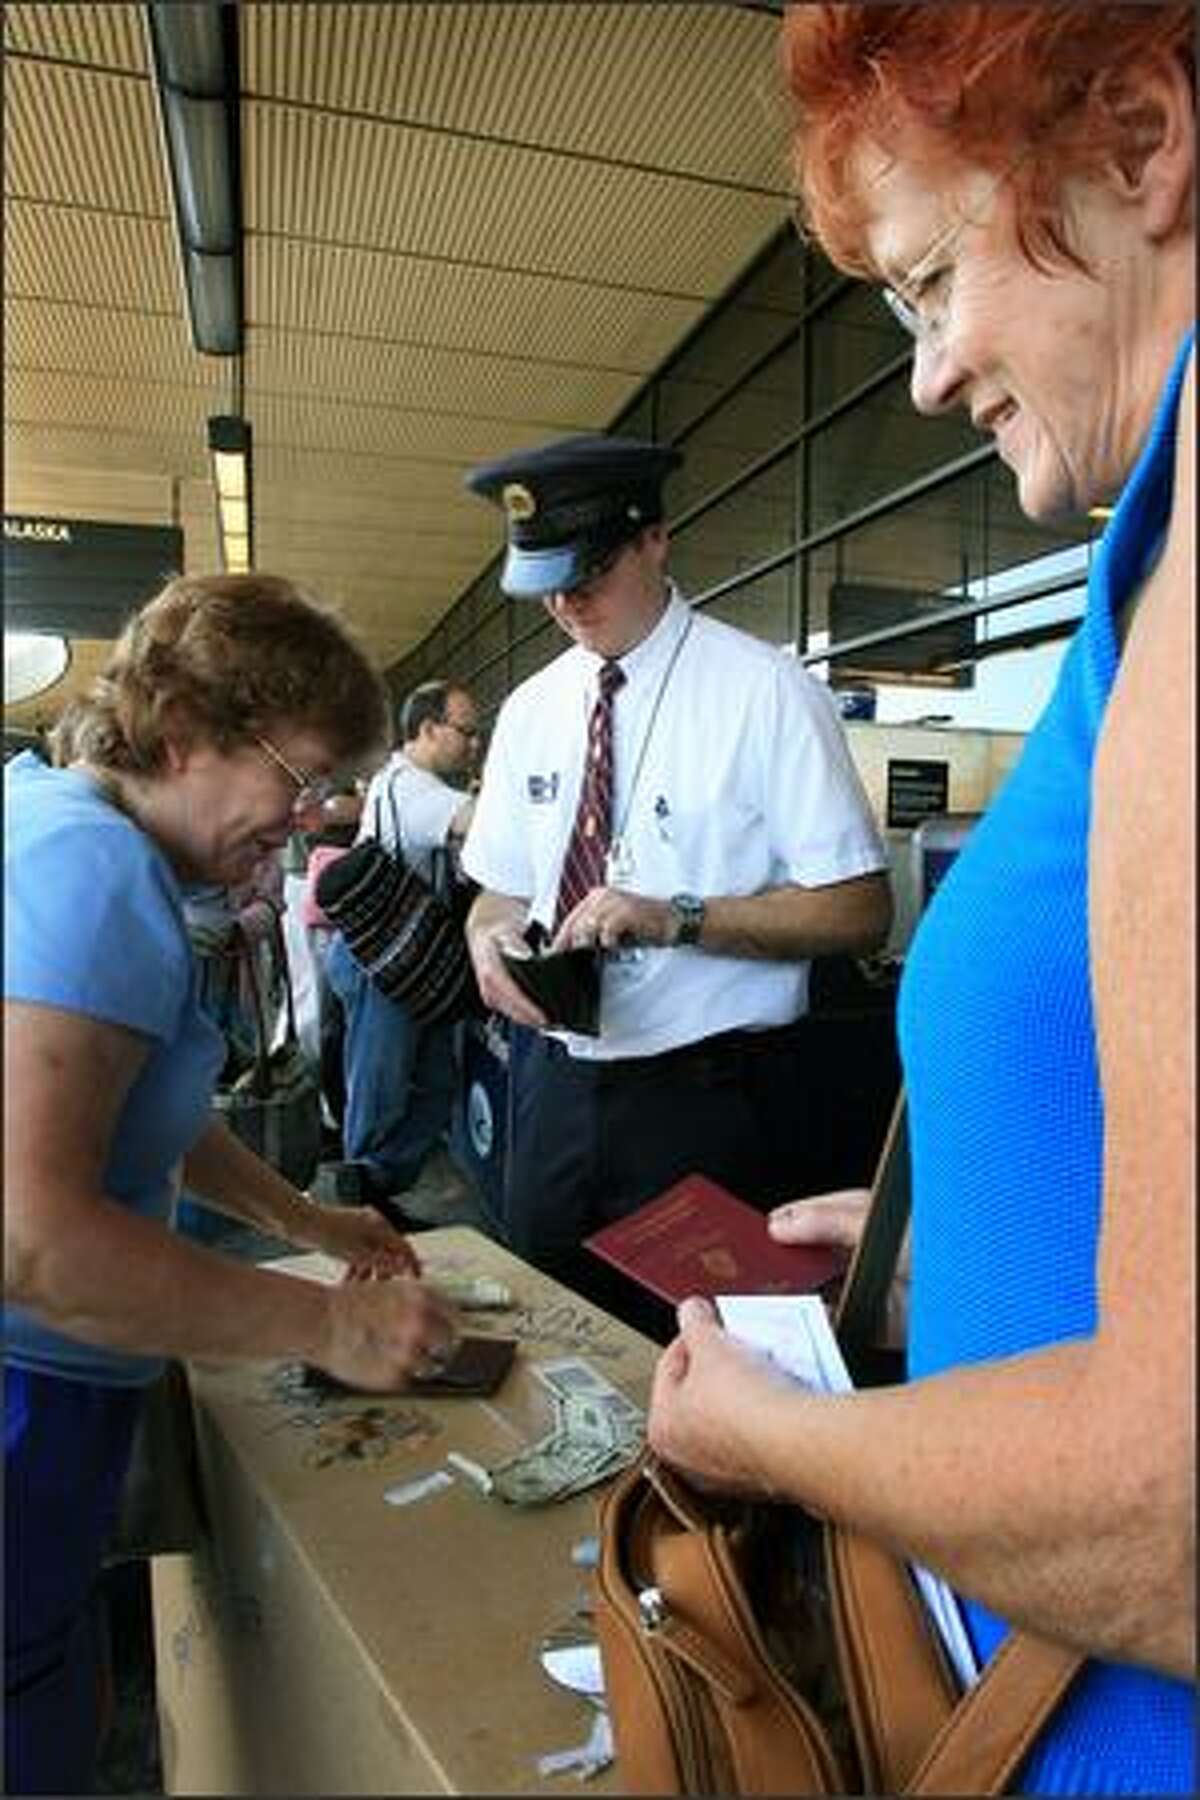 Skycap James Taggart helps Maura Barnes of Seattle, left, and Nuala Gaughran as they search for smaller bills to tip Taggart, who checked in their luggage at Sea-Tac Airport on Friday.